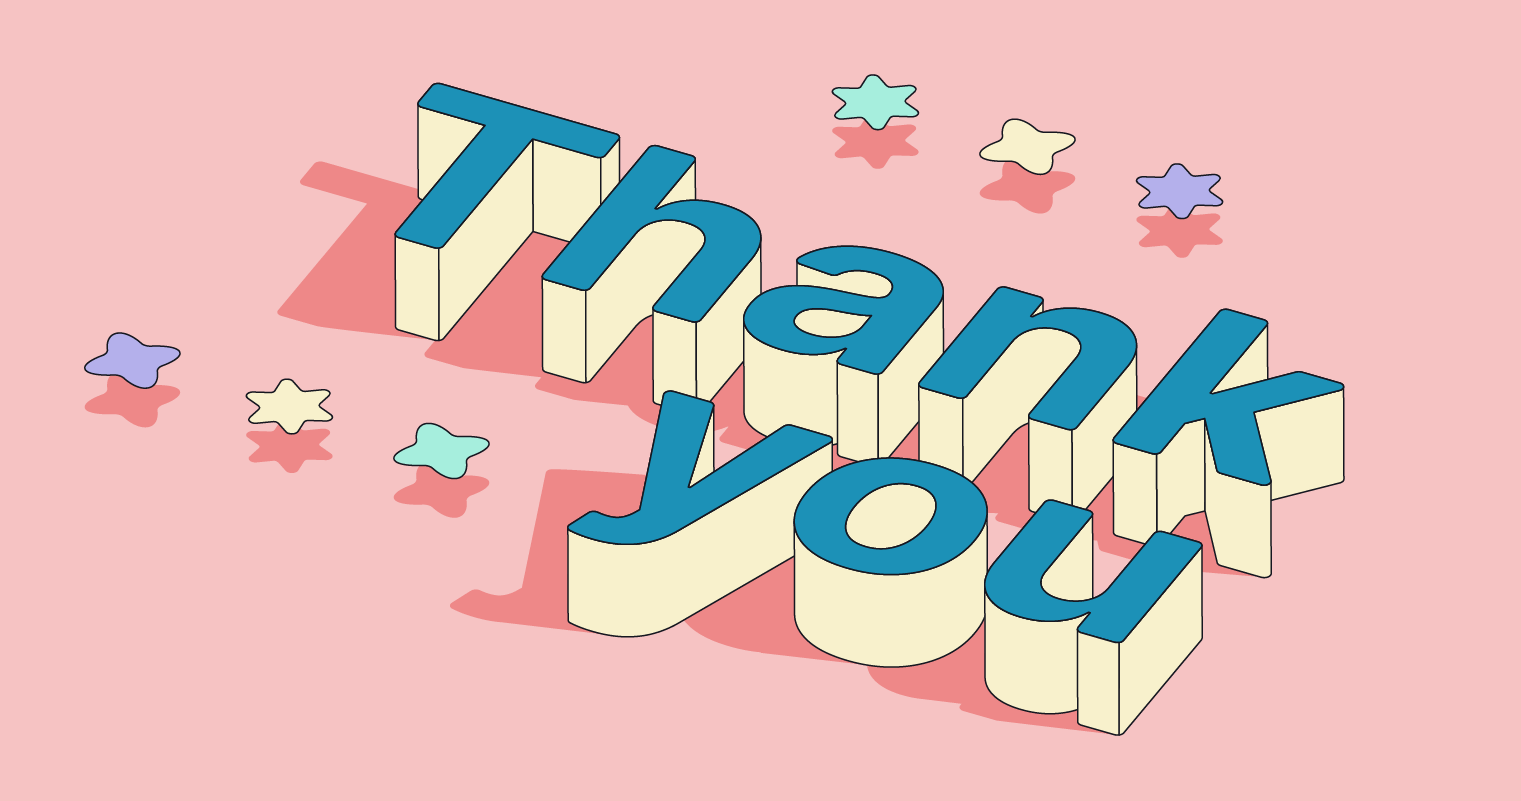 12 Ways to Say “Thank You”